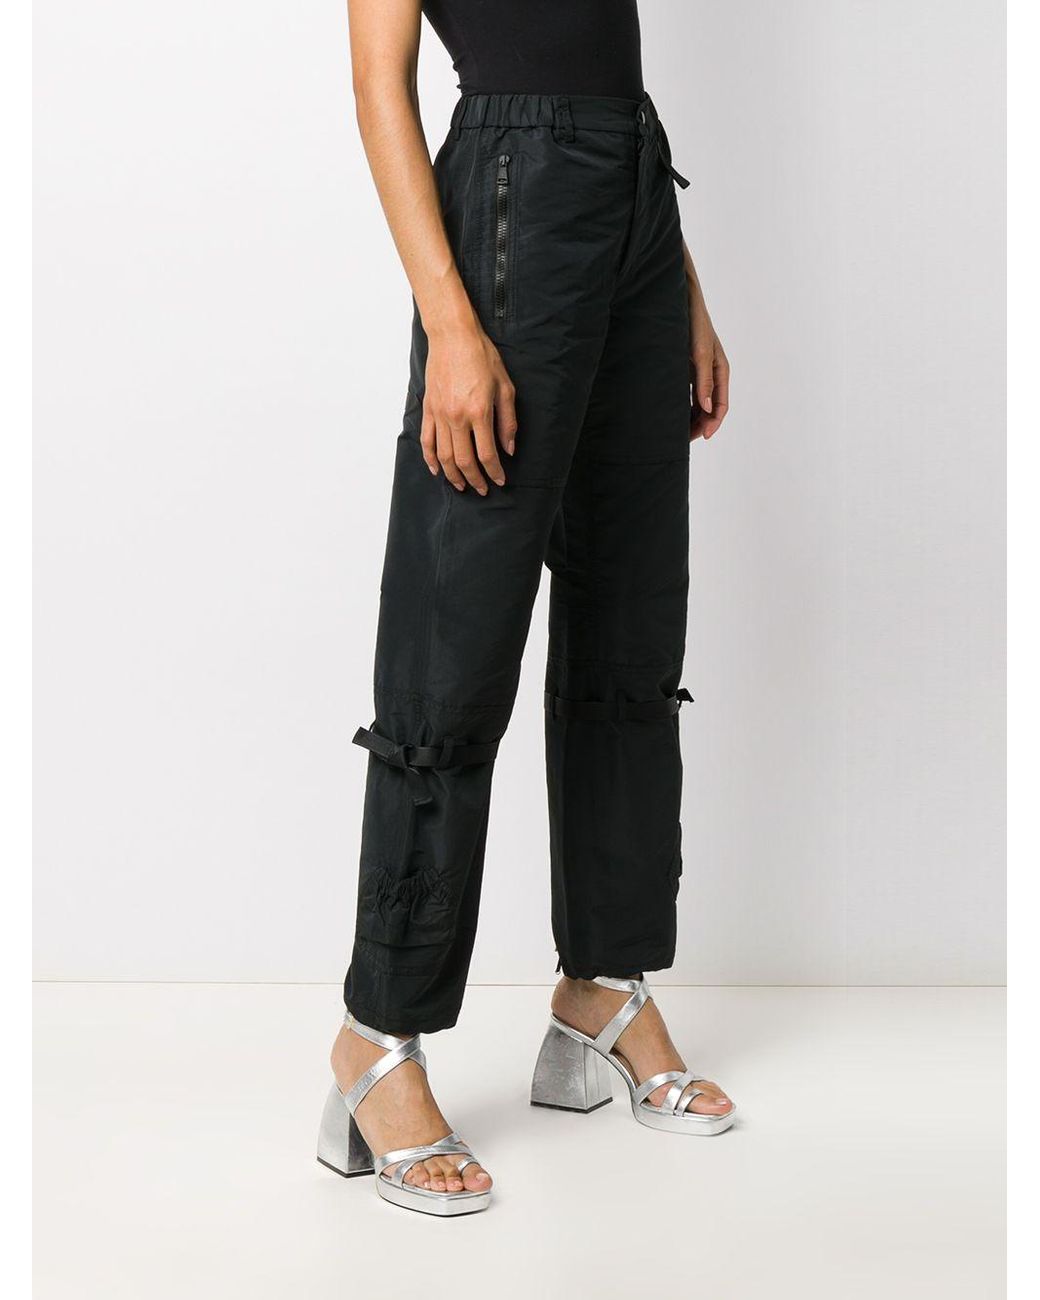 denim cargo pants with side strap